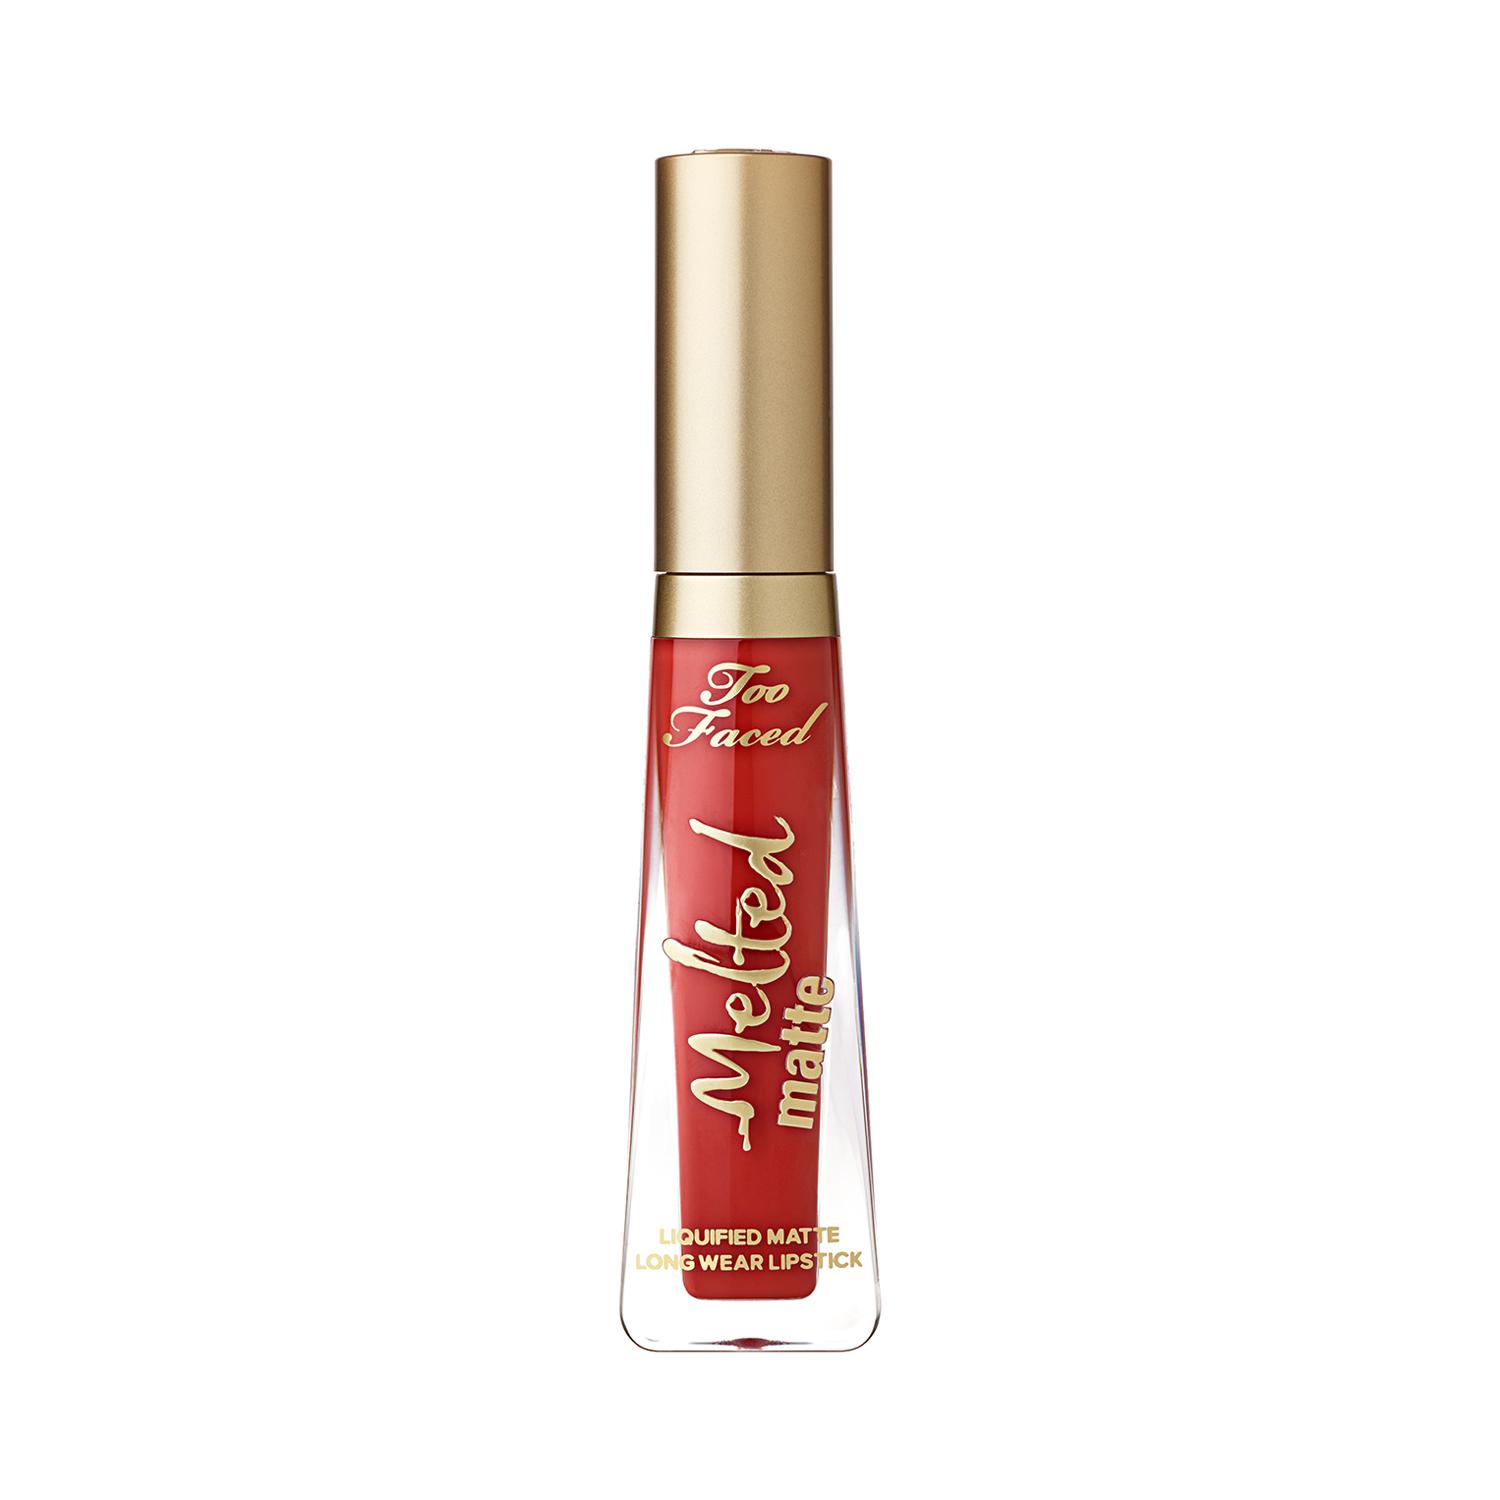 Too Faced | Too Faced Melted Matte Lipstick - Nasty Girl (7ml)